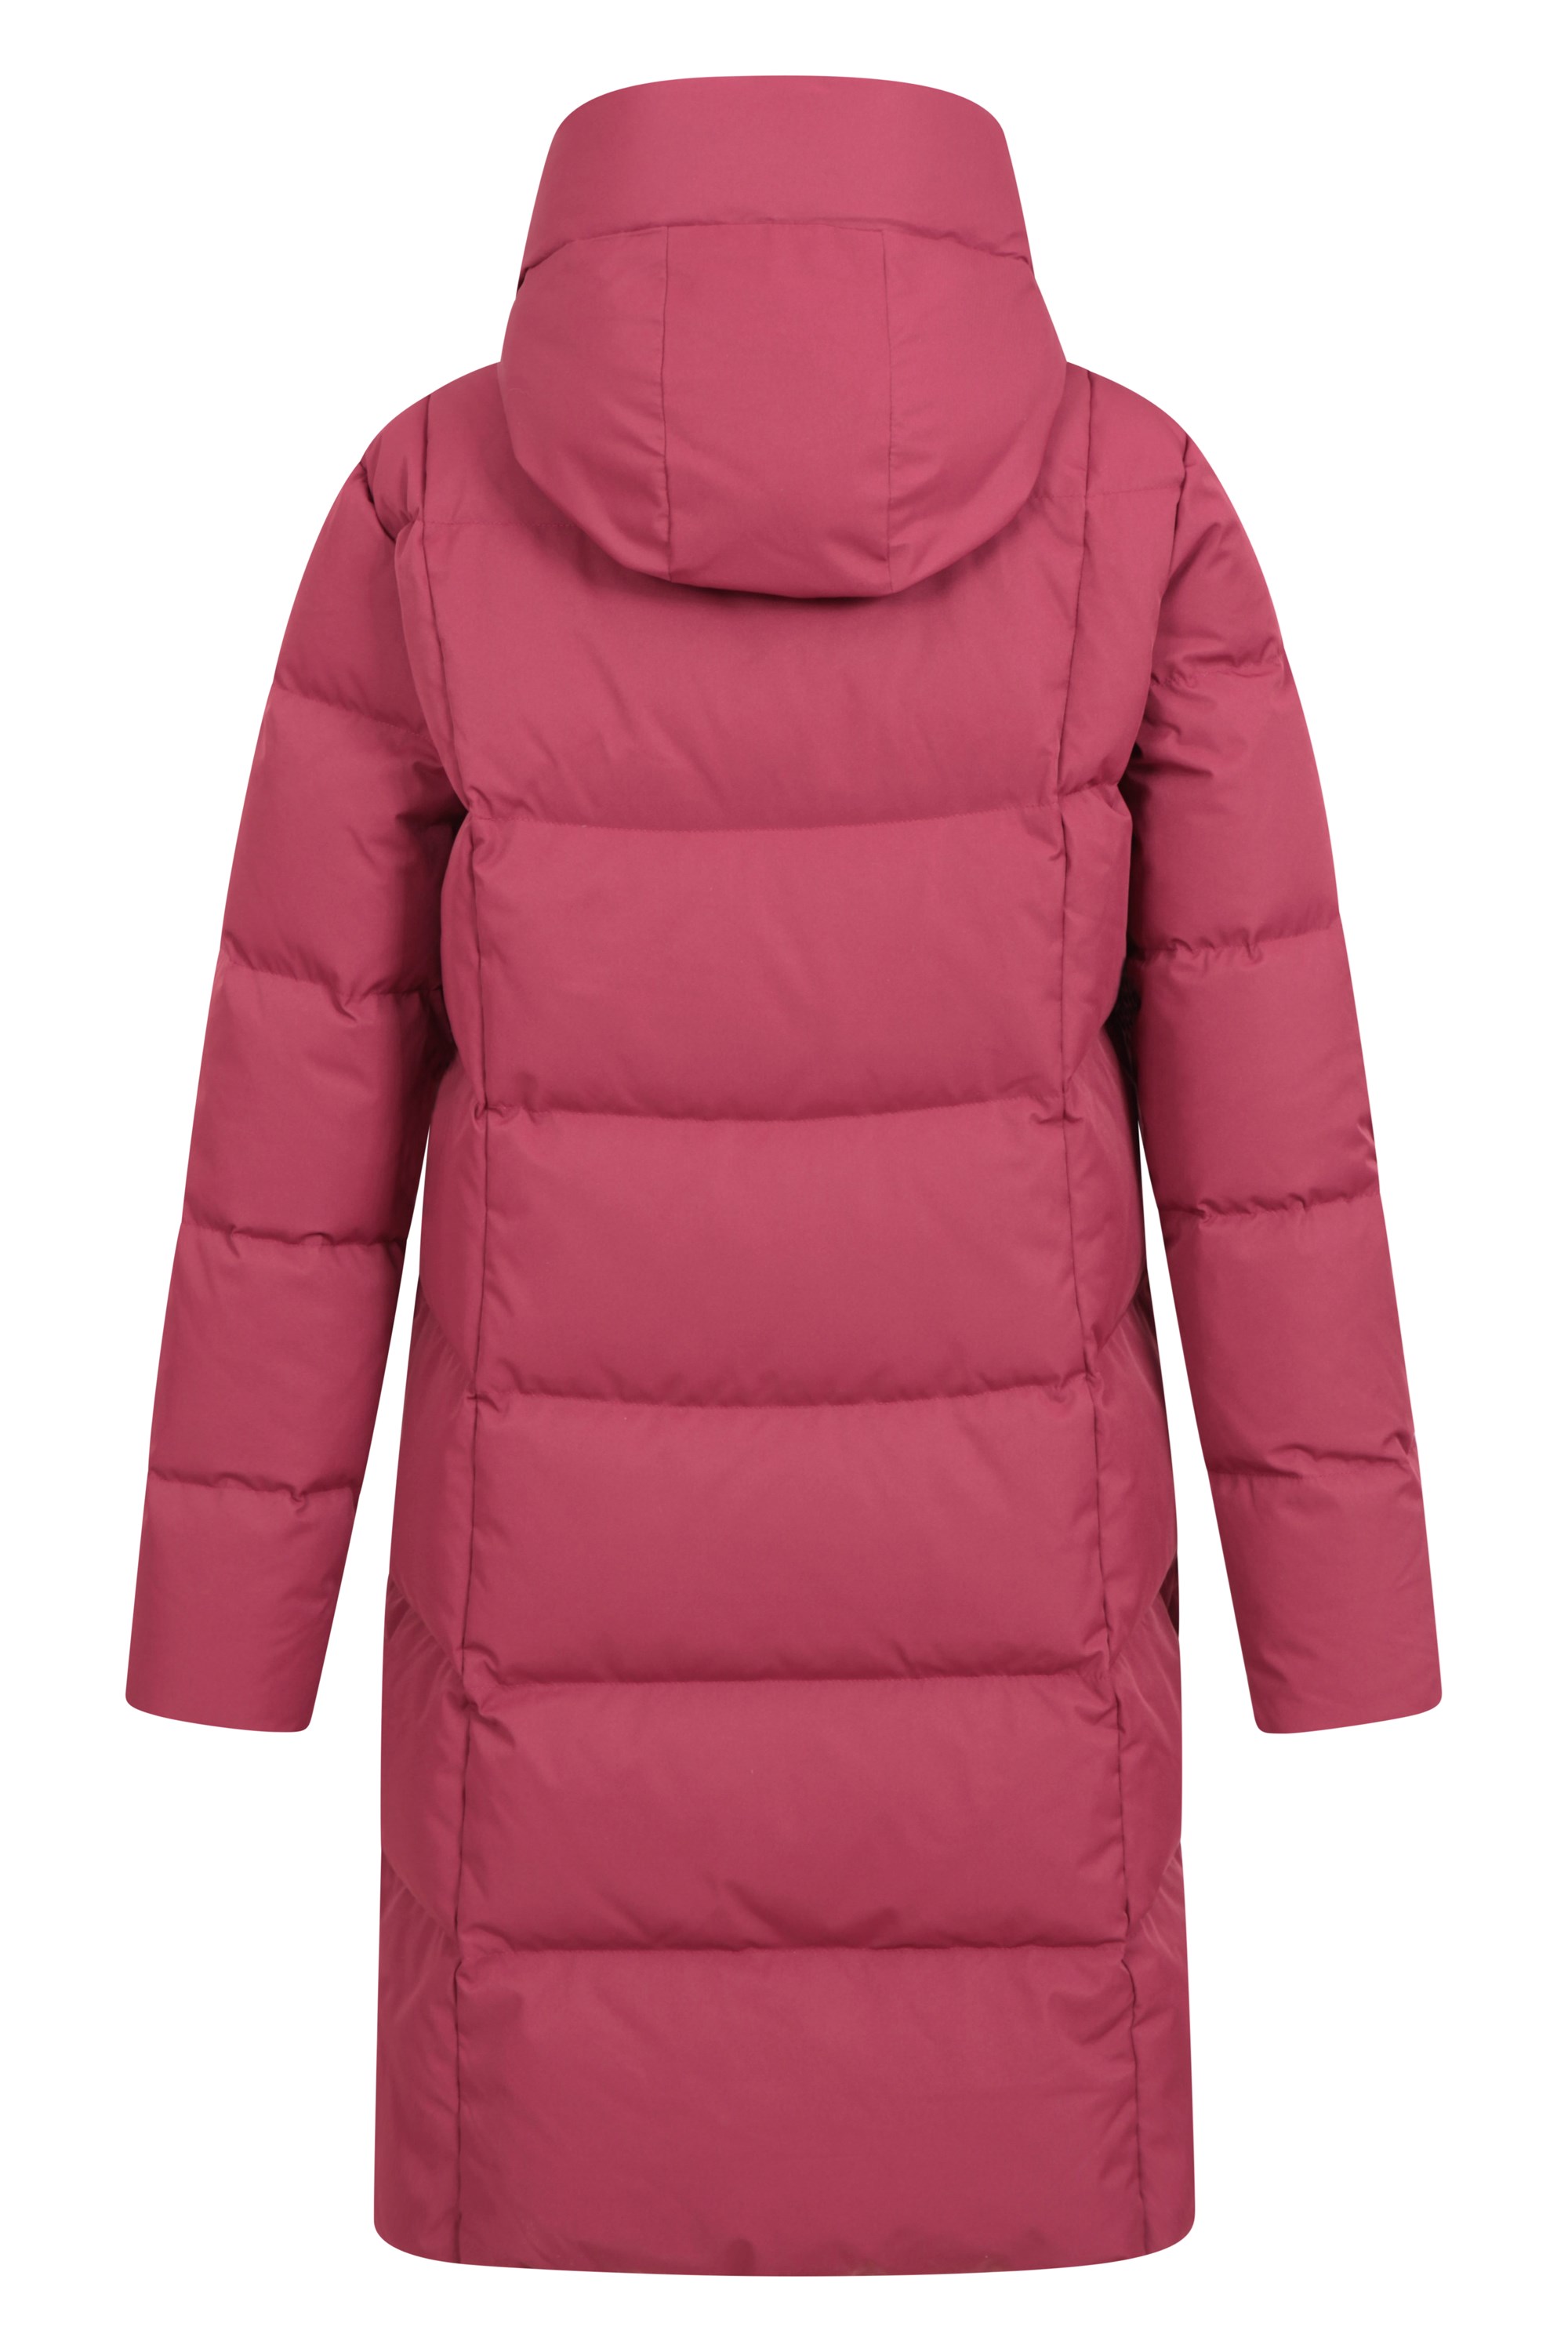 Cozy Extreme Womens Short Down Jacket